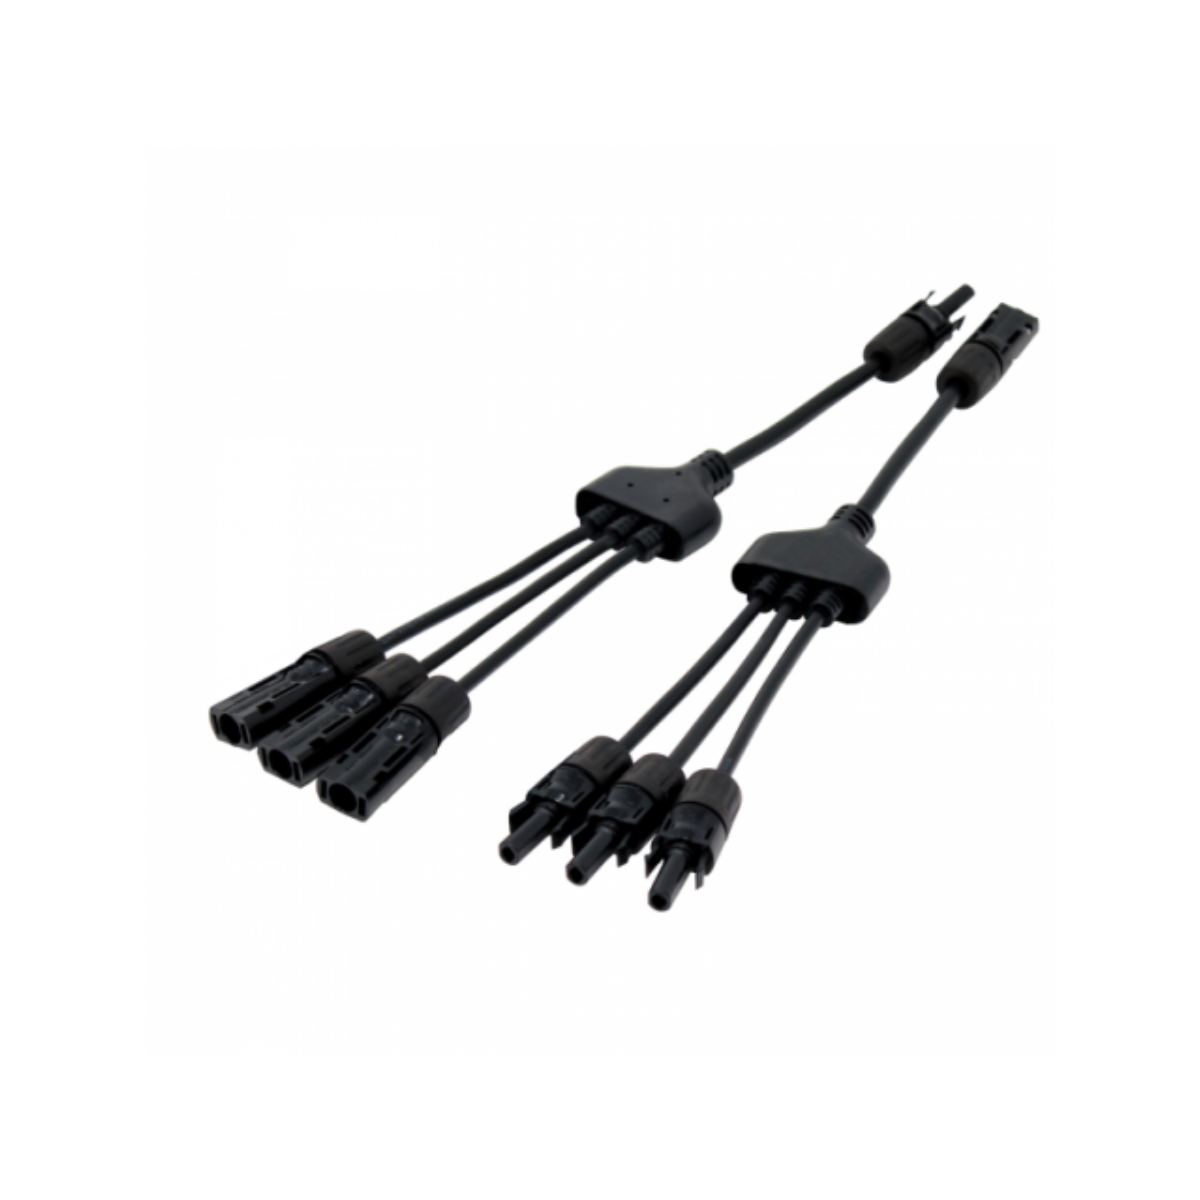 Pair of MC4 Compatible 3-to-1 Cable Connectors For Solar Panels